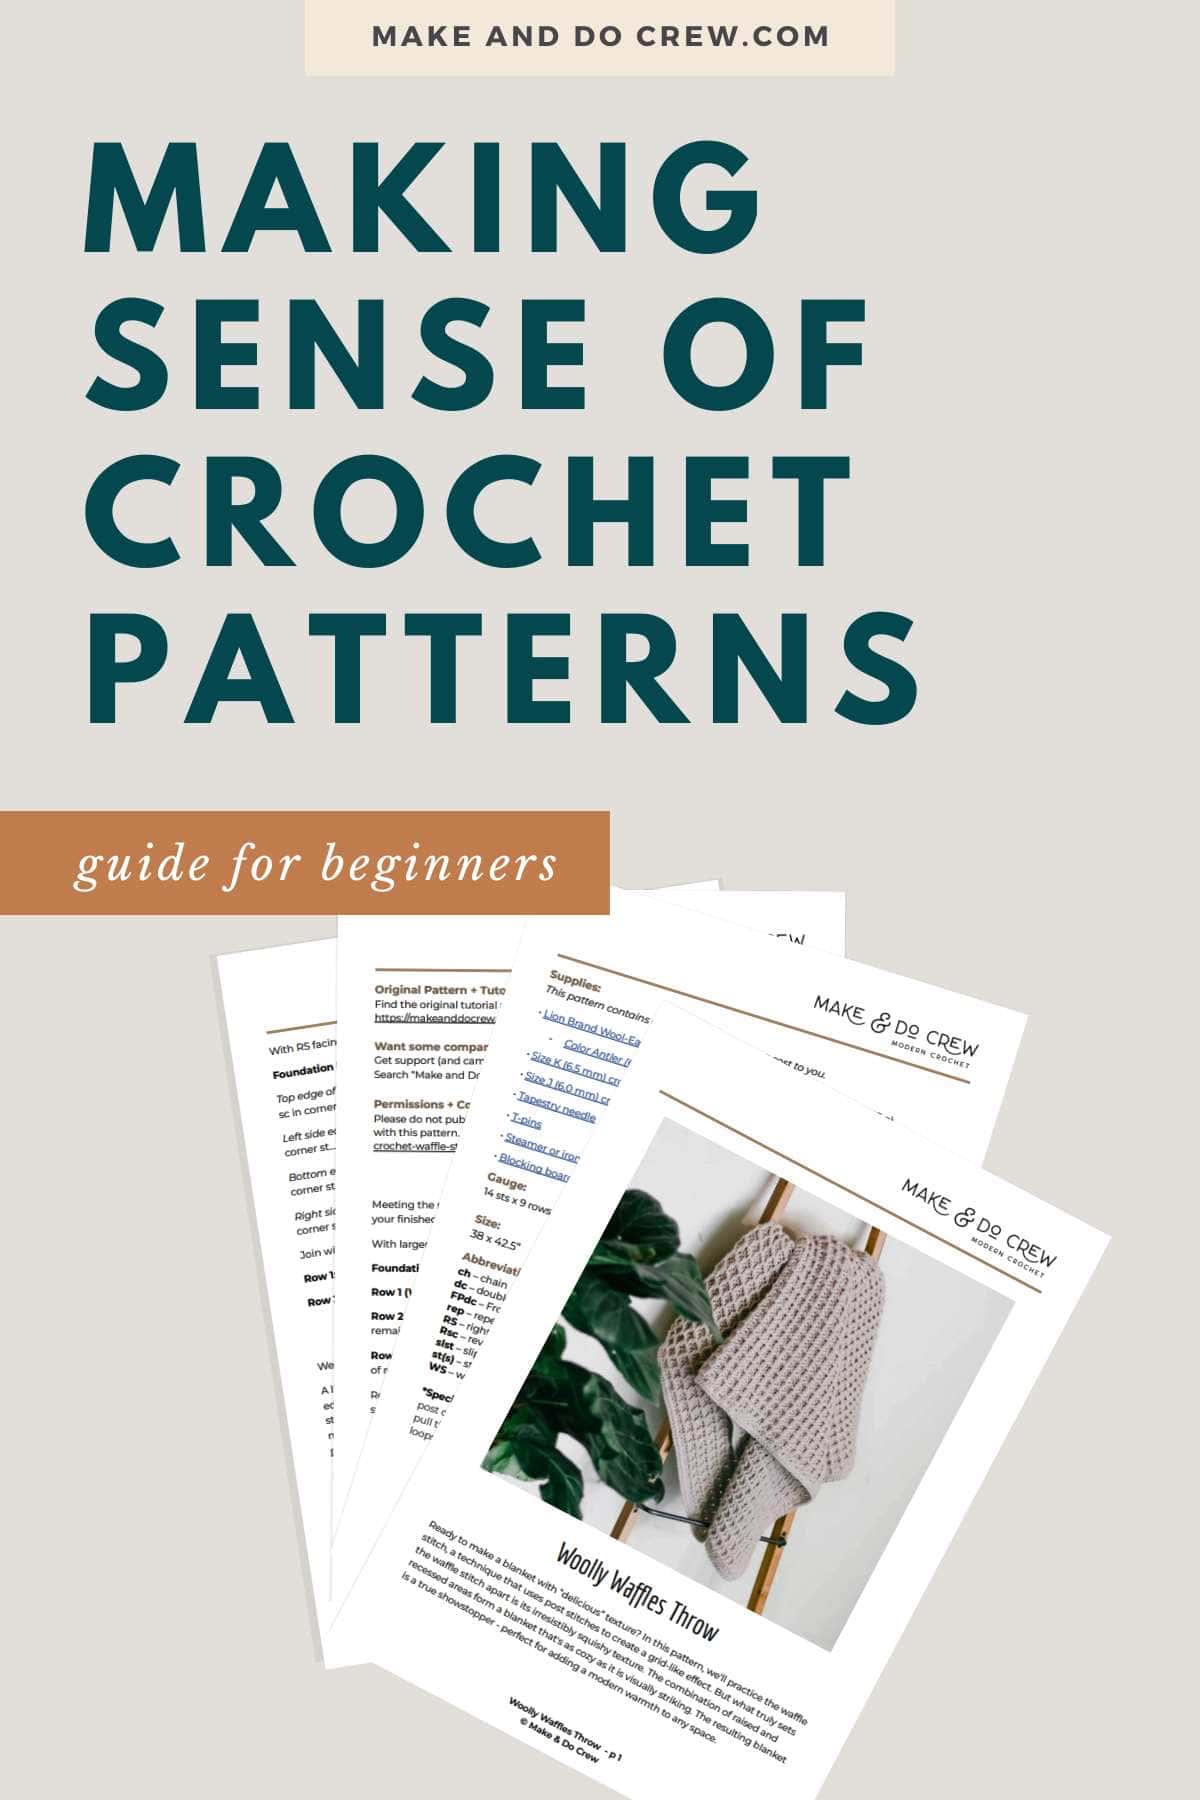 How to read crochet patterns guide for beginners.